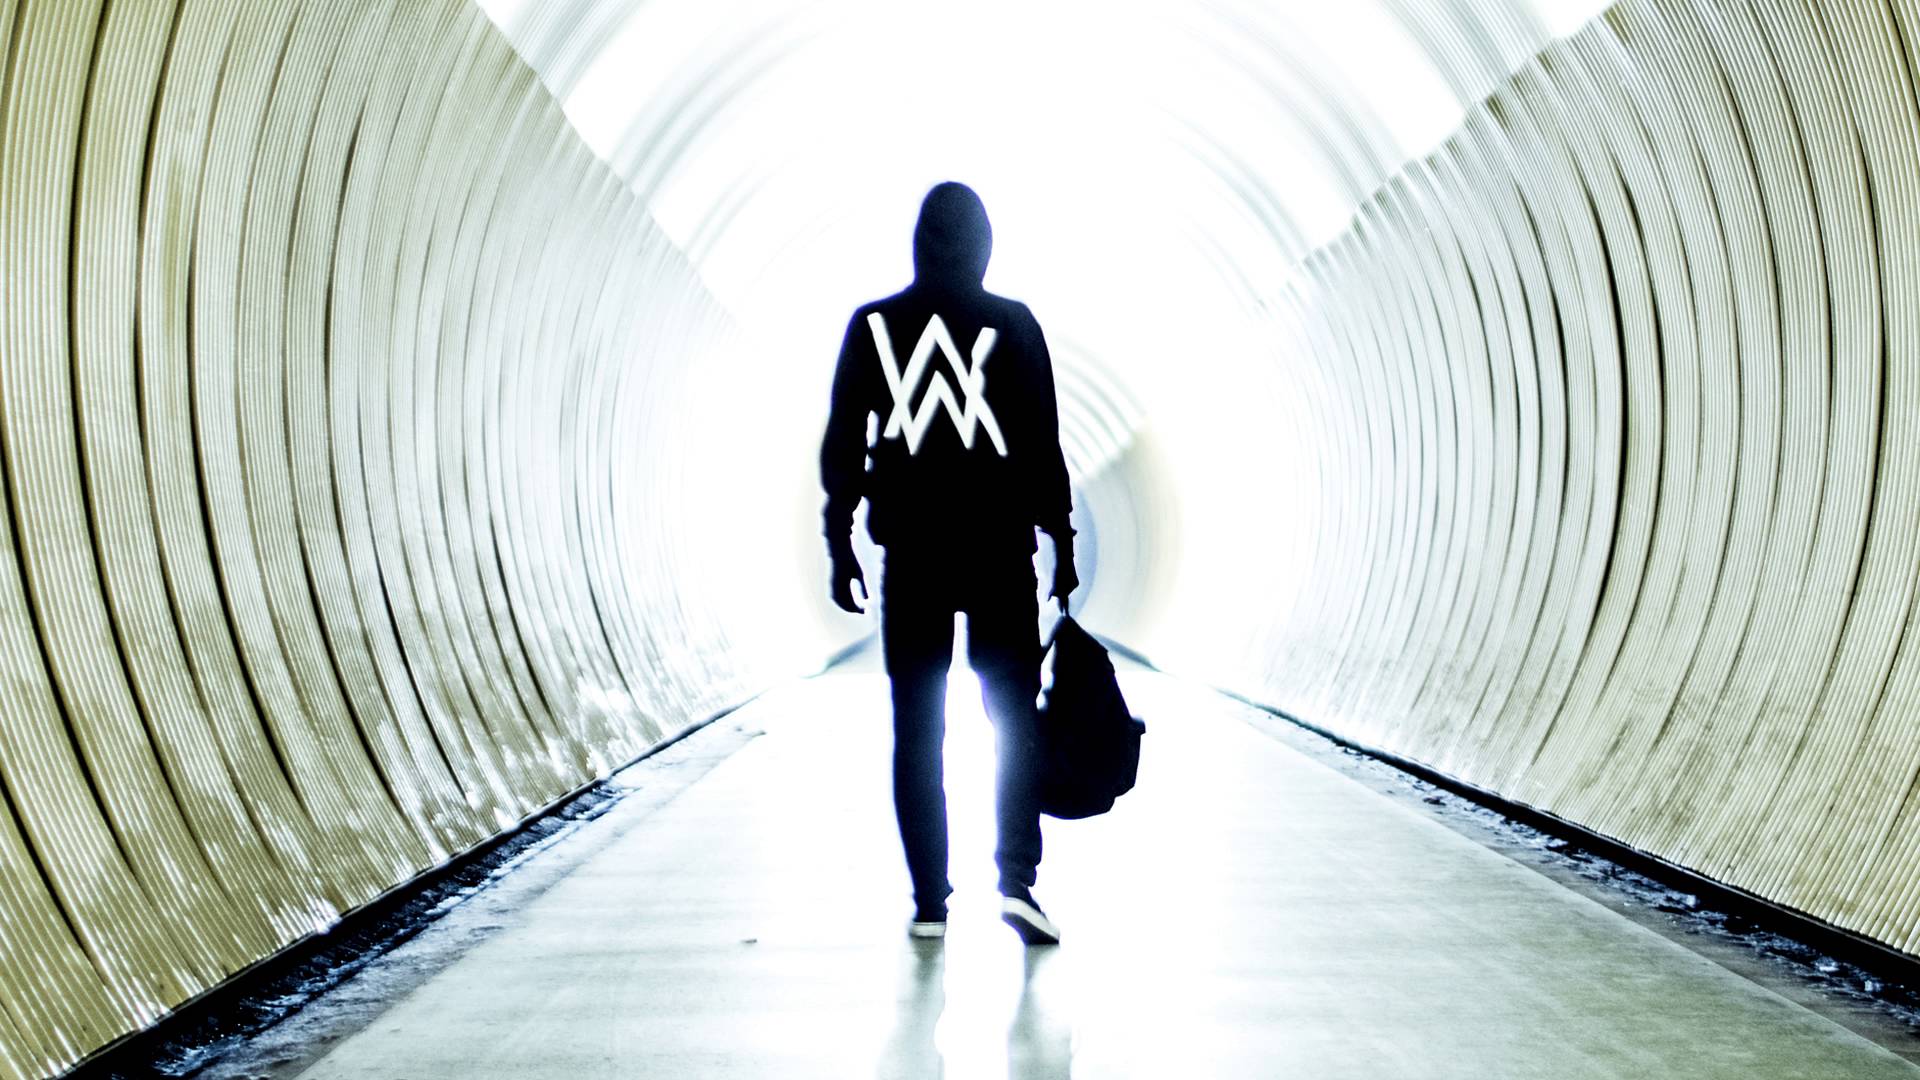 I&#25;ve Learnt Music By Watching YouTube Tutorials" Alan Walker In